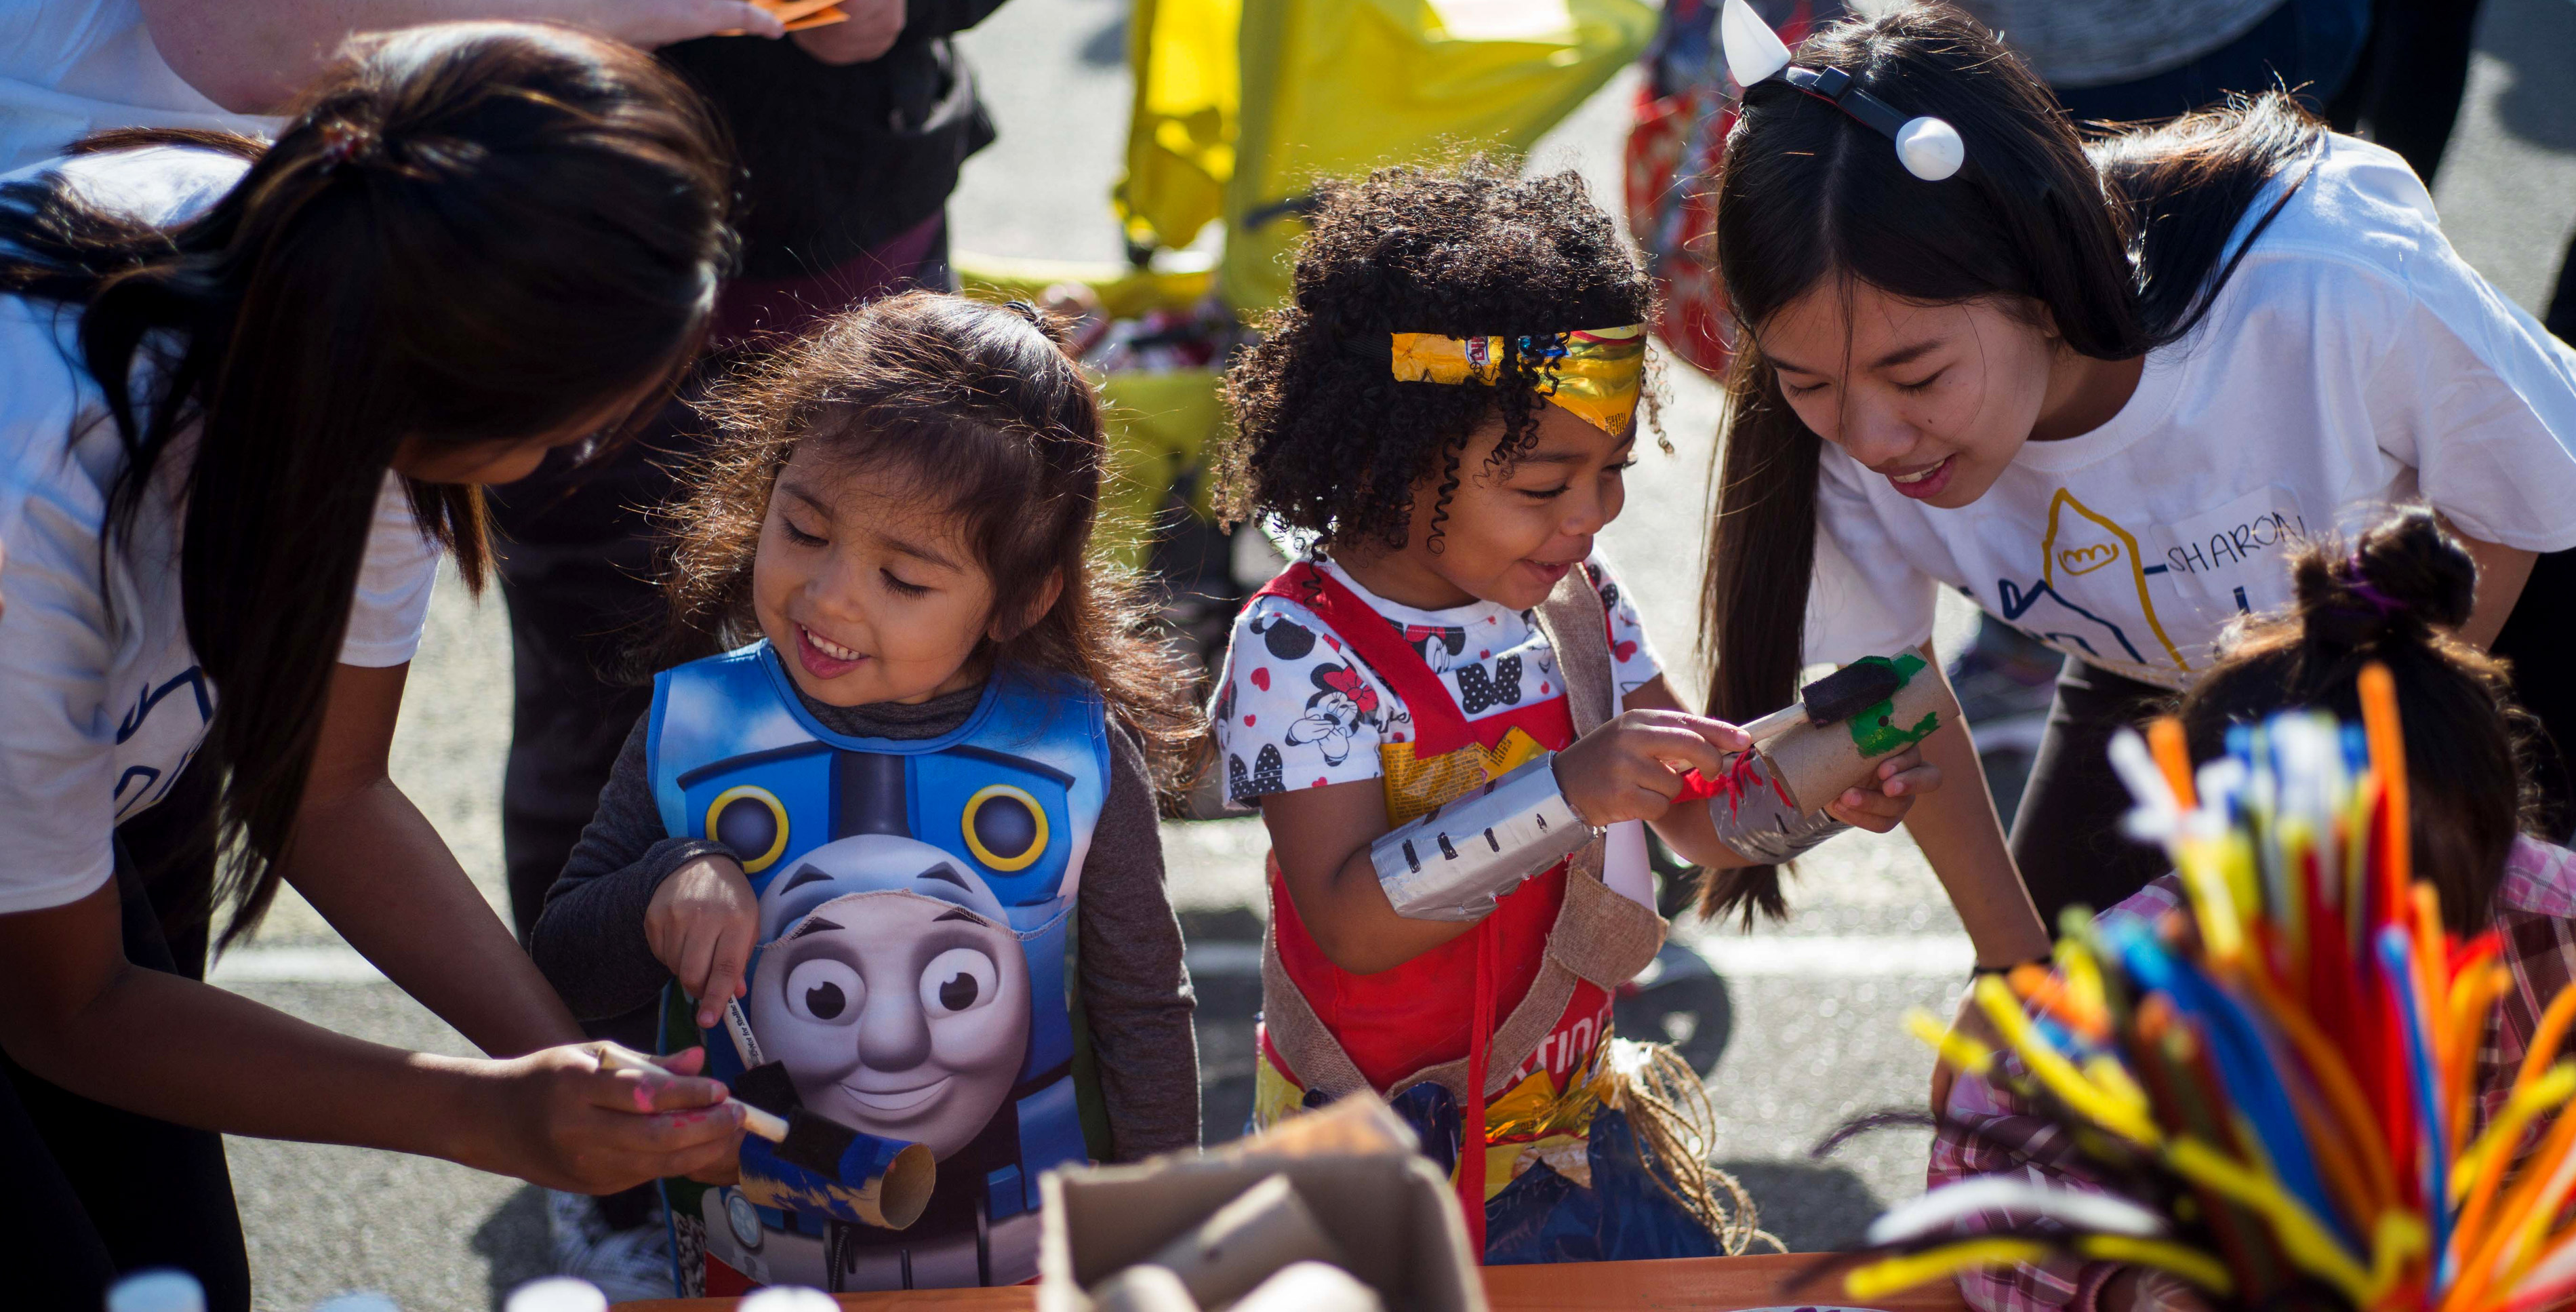 Student volunteers help two kids with arts and crafts during a halloween event.